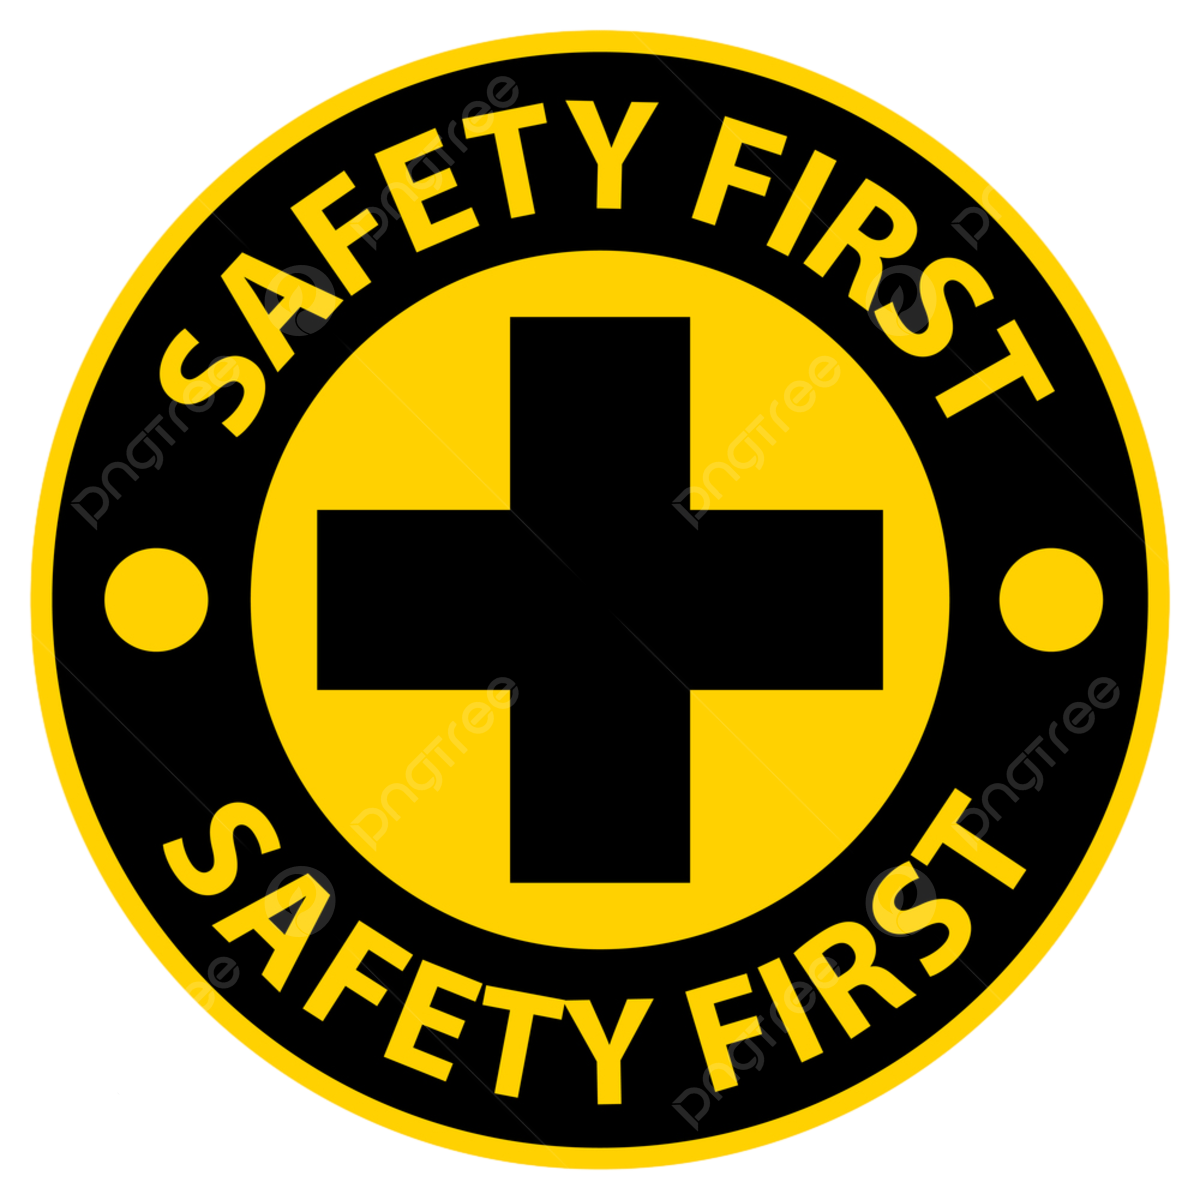 TIPS – CONcentric SAFETY CON